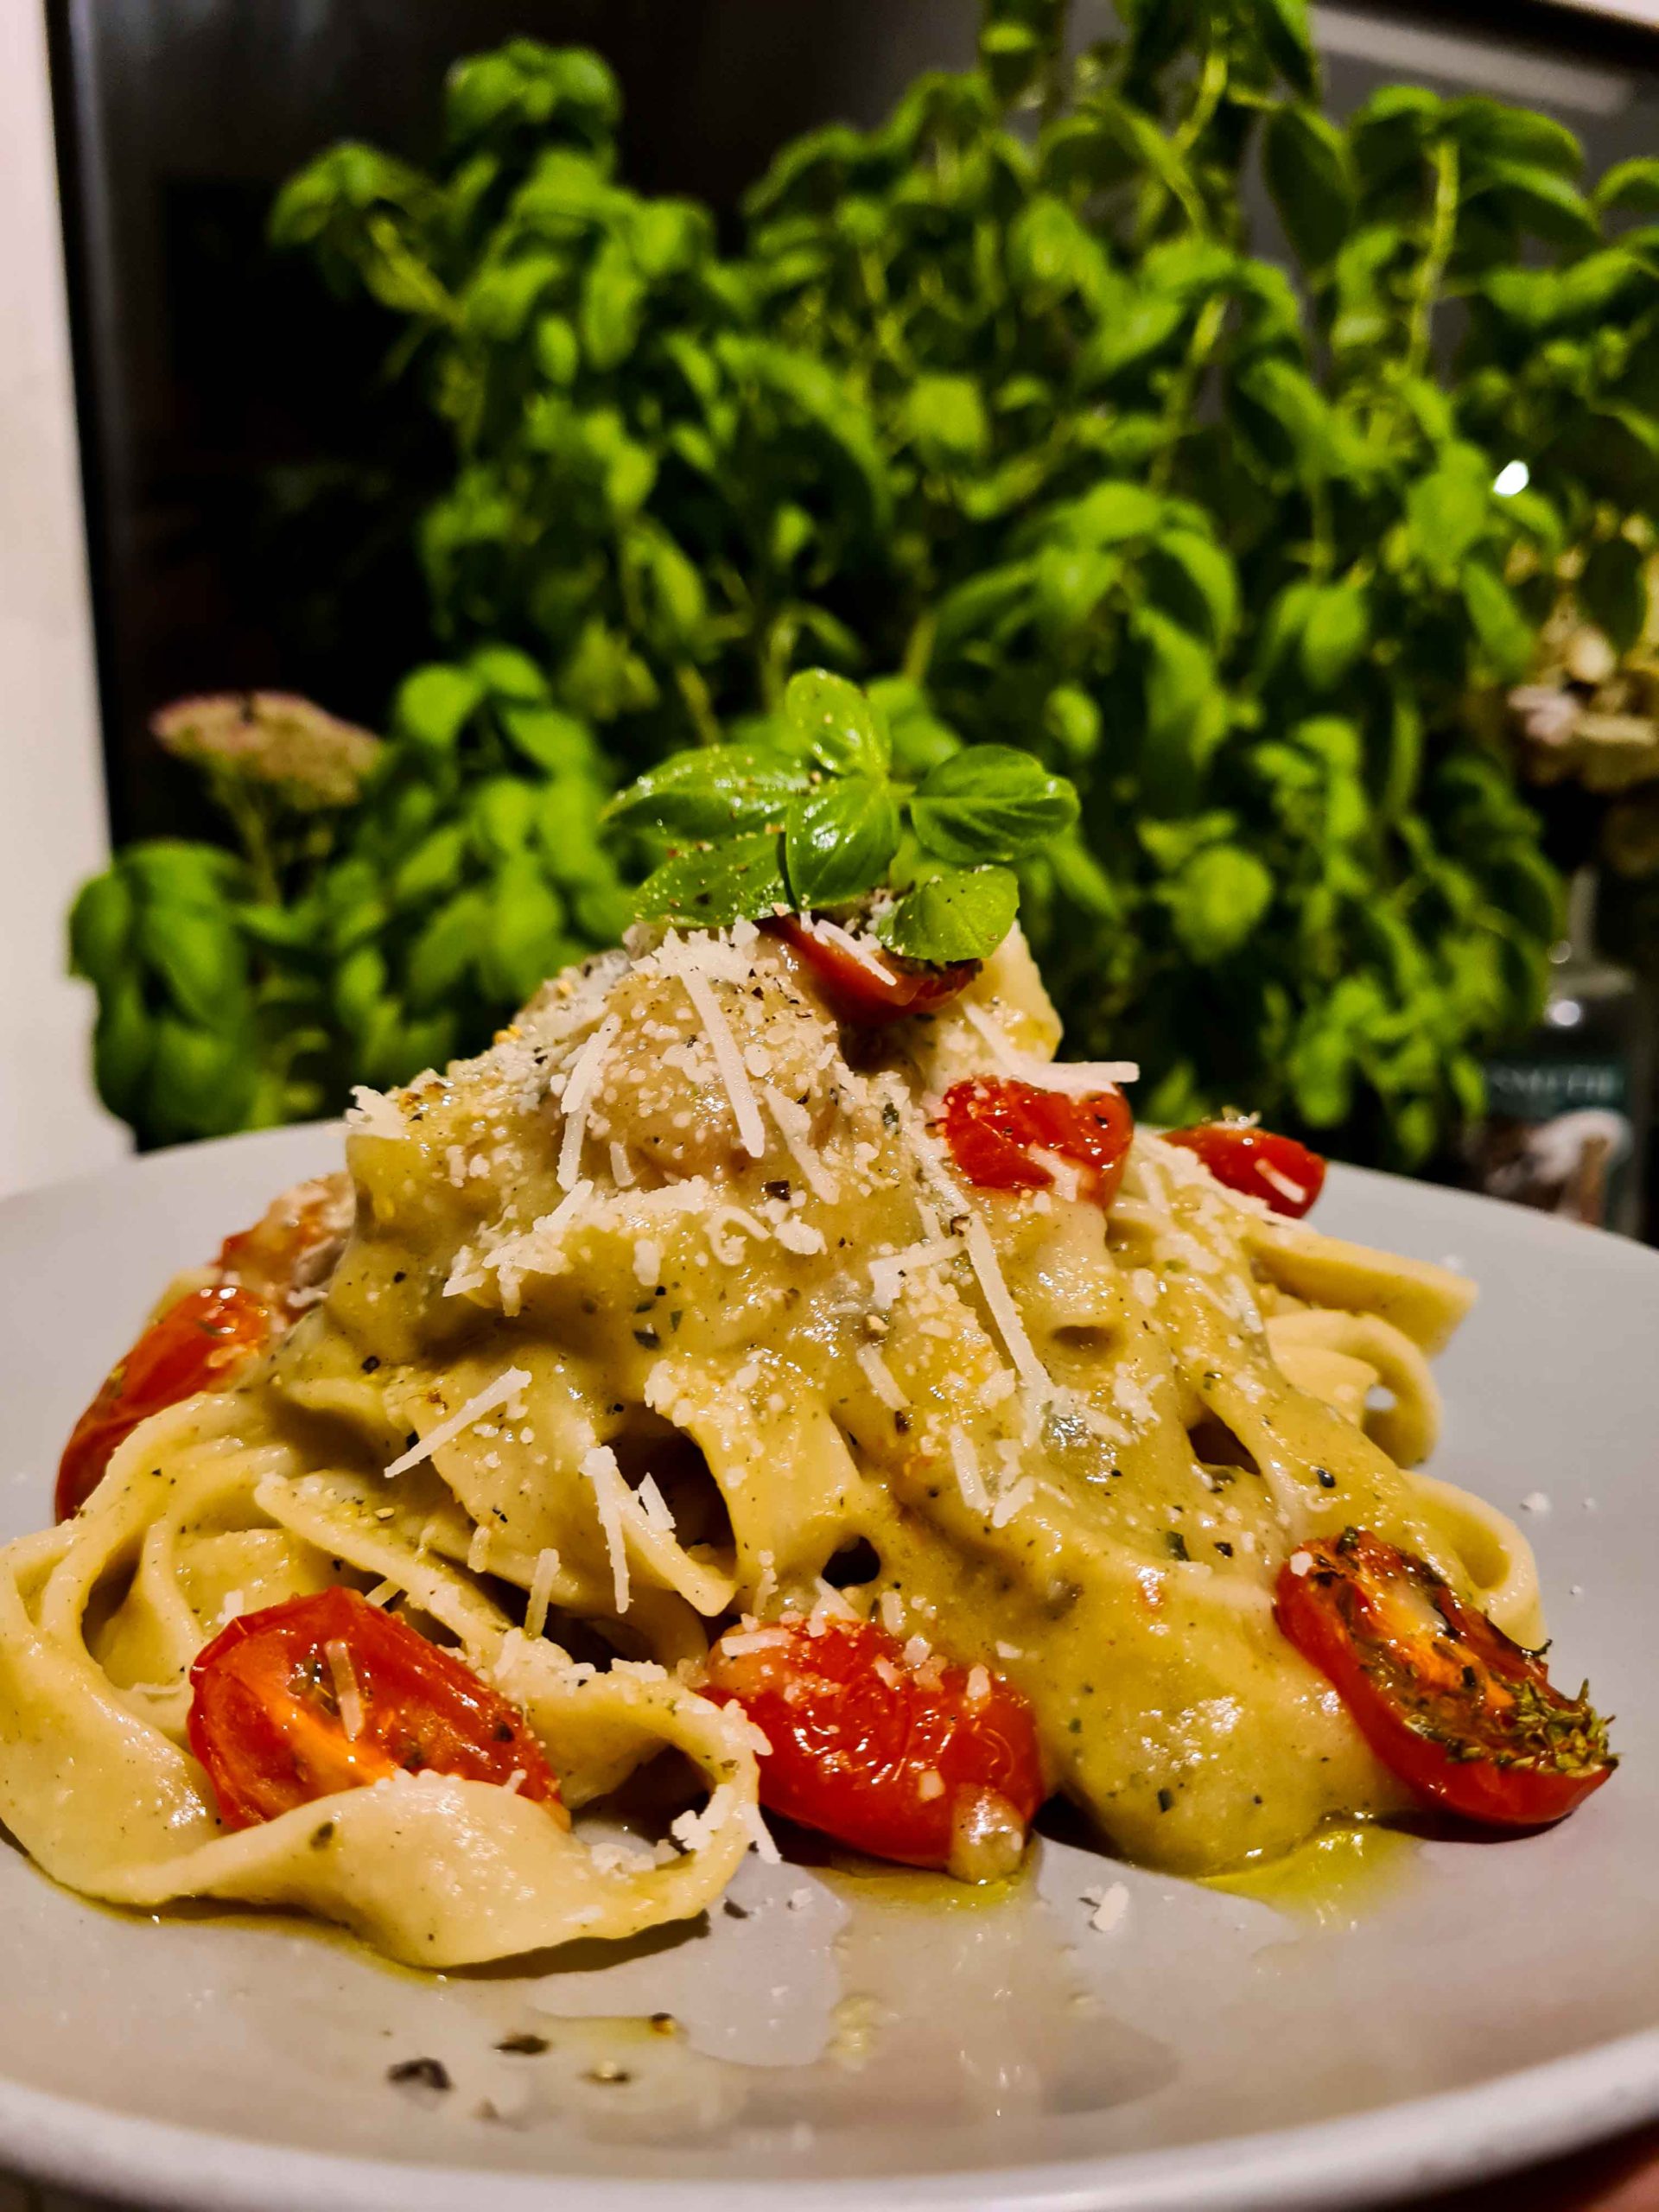 The Best Smoky Aubergine Pasta With Datterini Tomatoes Confit | Rebecca TG